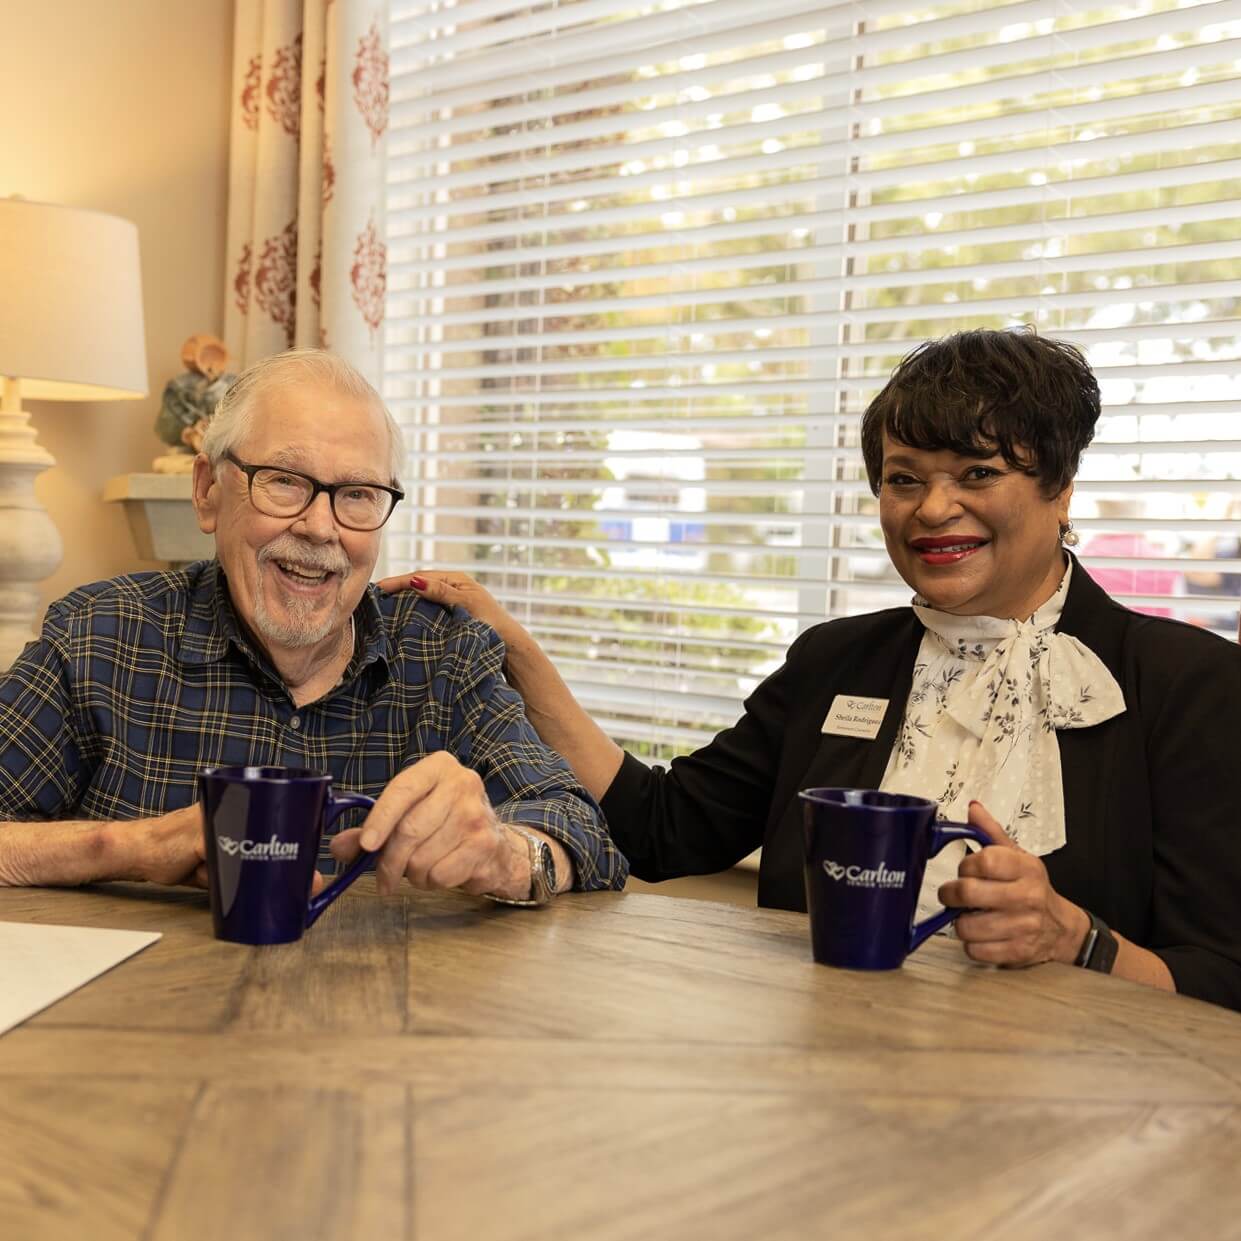 Carlton offers short-term respite stays, independent living, assisted living and memory care